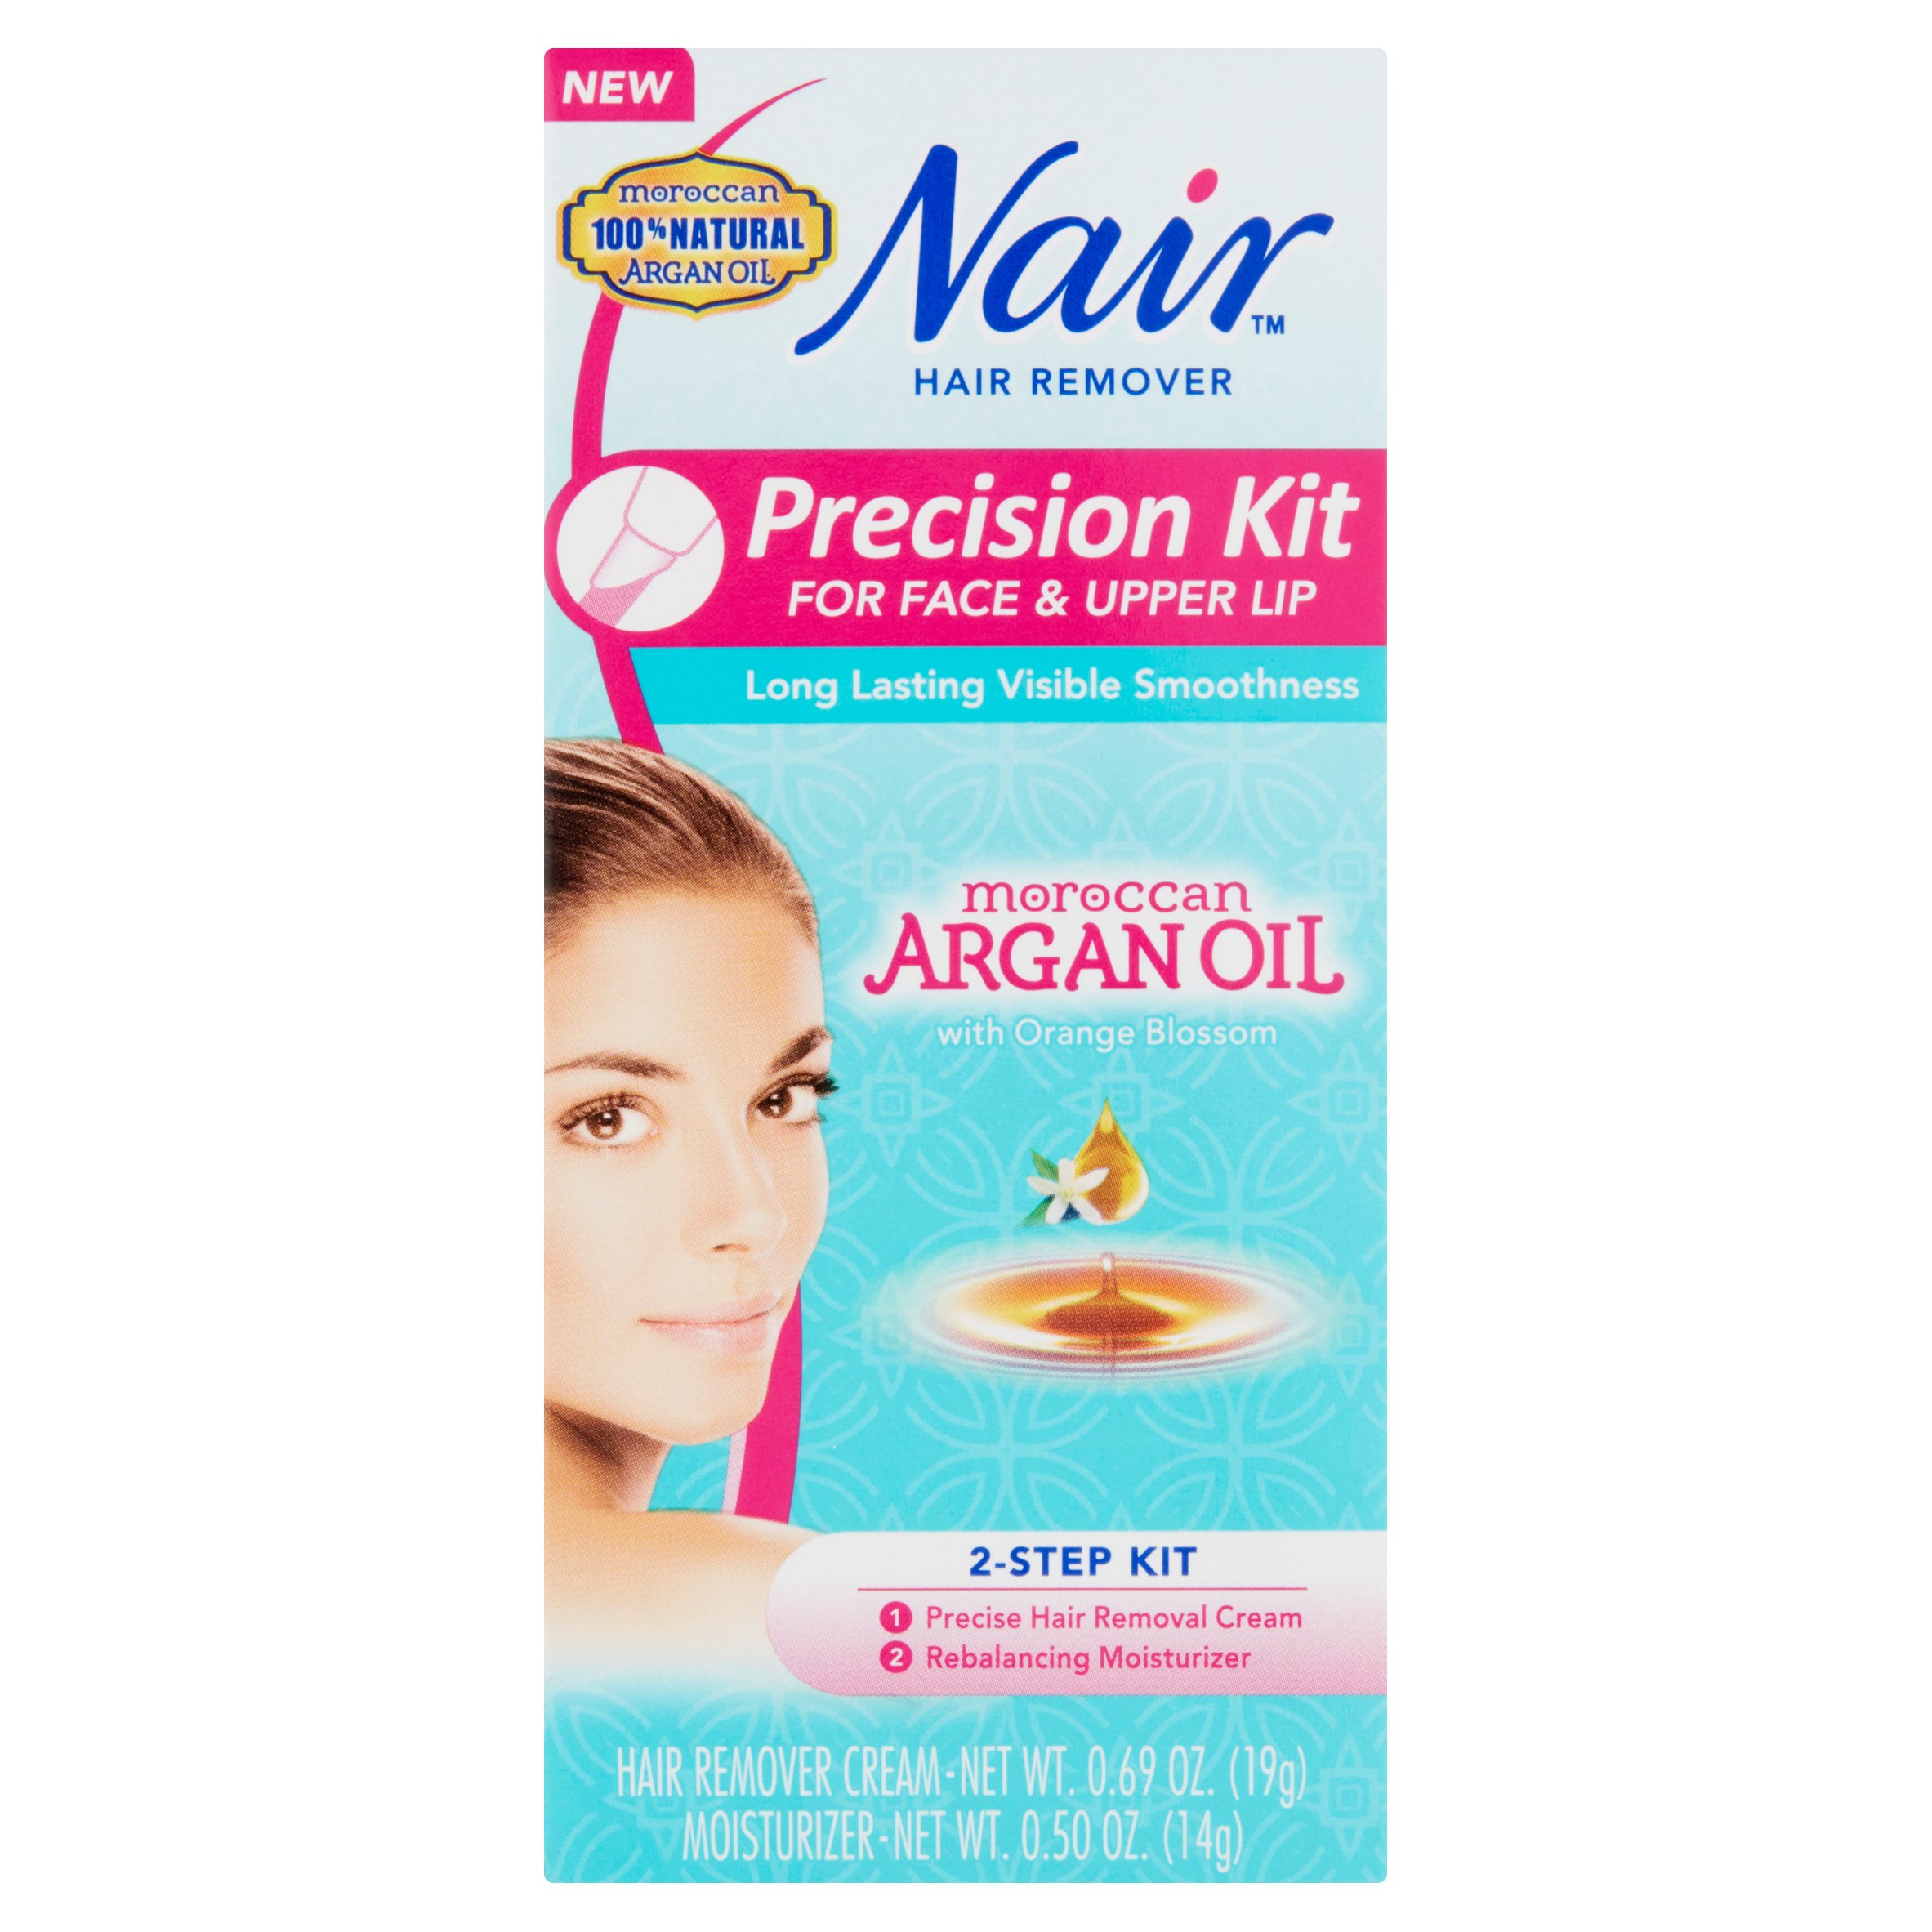 Nair Precision Kit for Face & Upper Lip Hair Remover - image 1 of 6